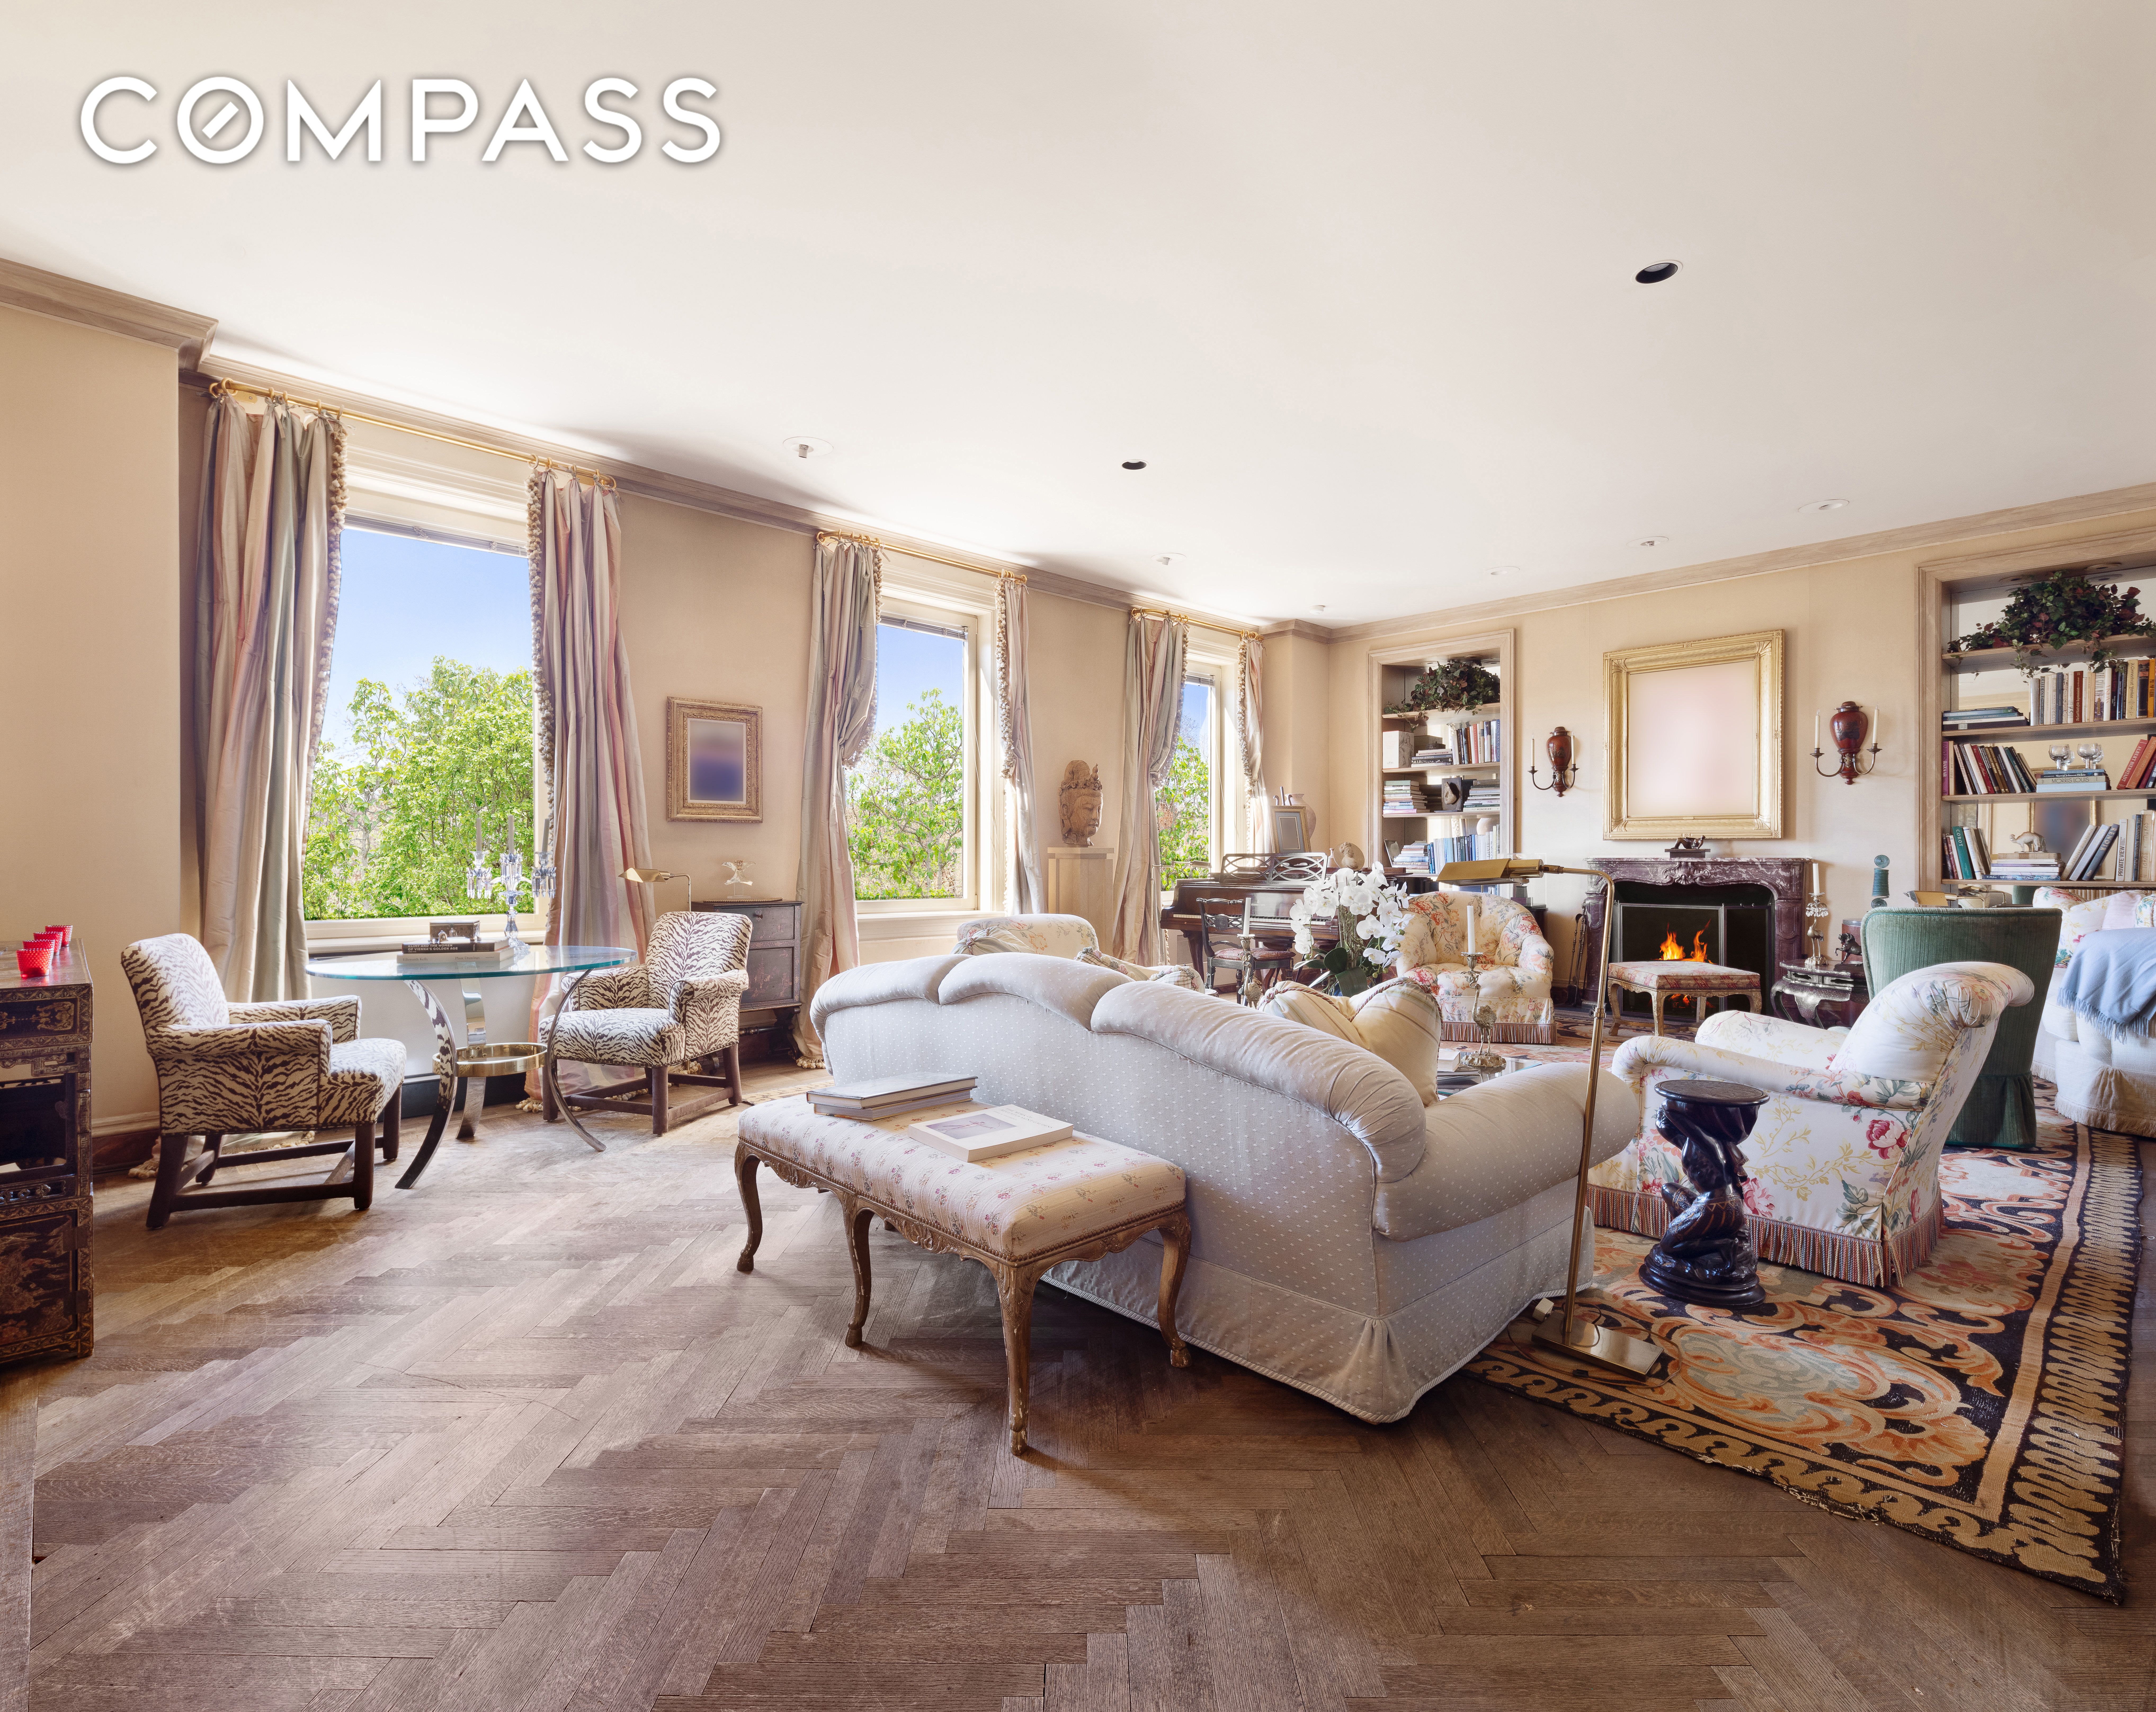 944 5th Avenue 6, Lenox Hill, Upper East Side, NYC - 5 Bedrooms  
5.5 Bathrooms  
11 Rooms - 